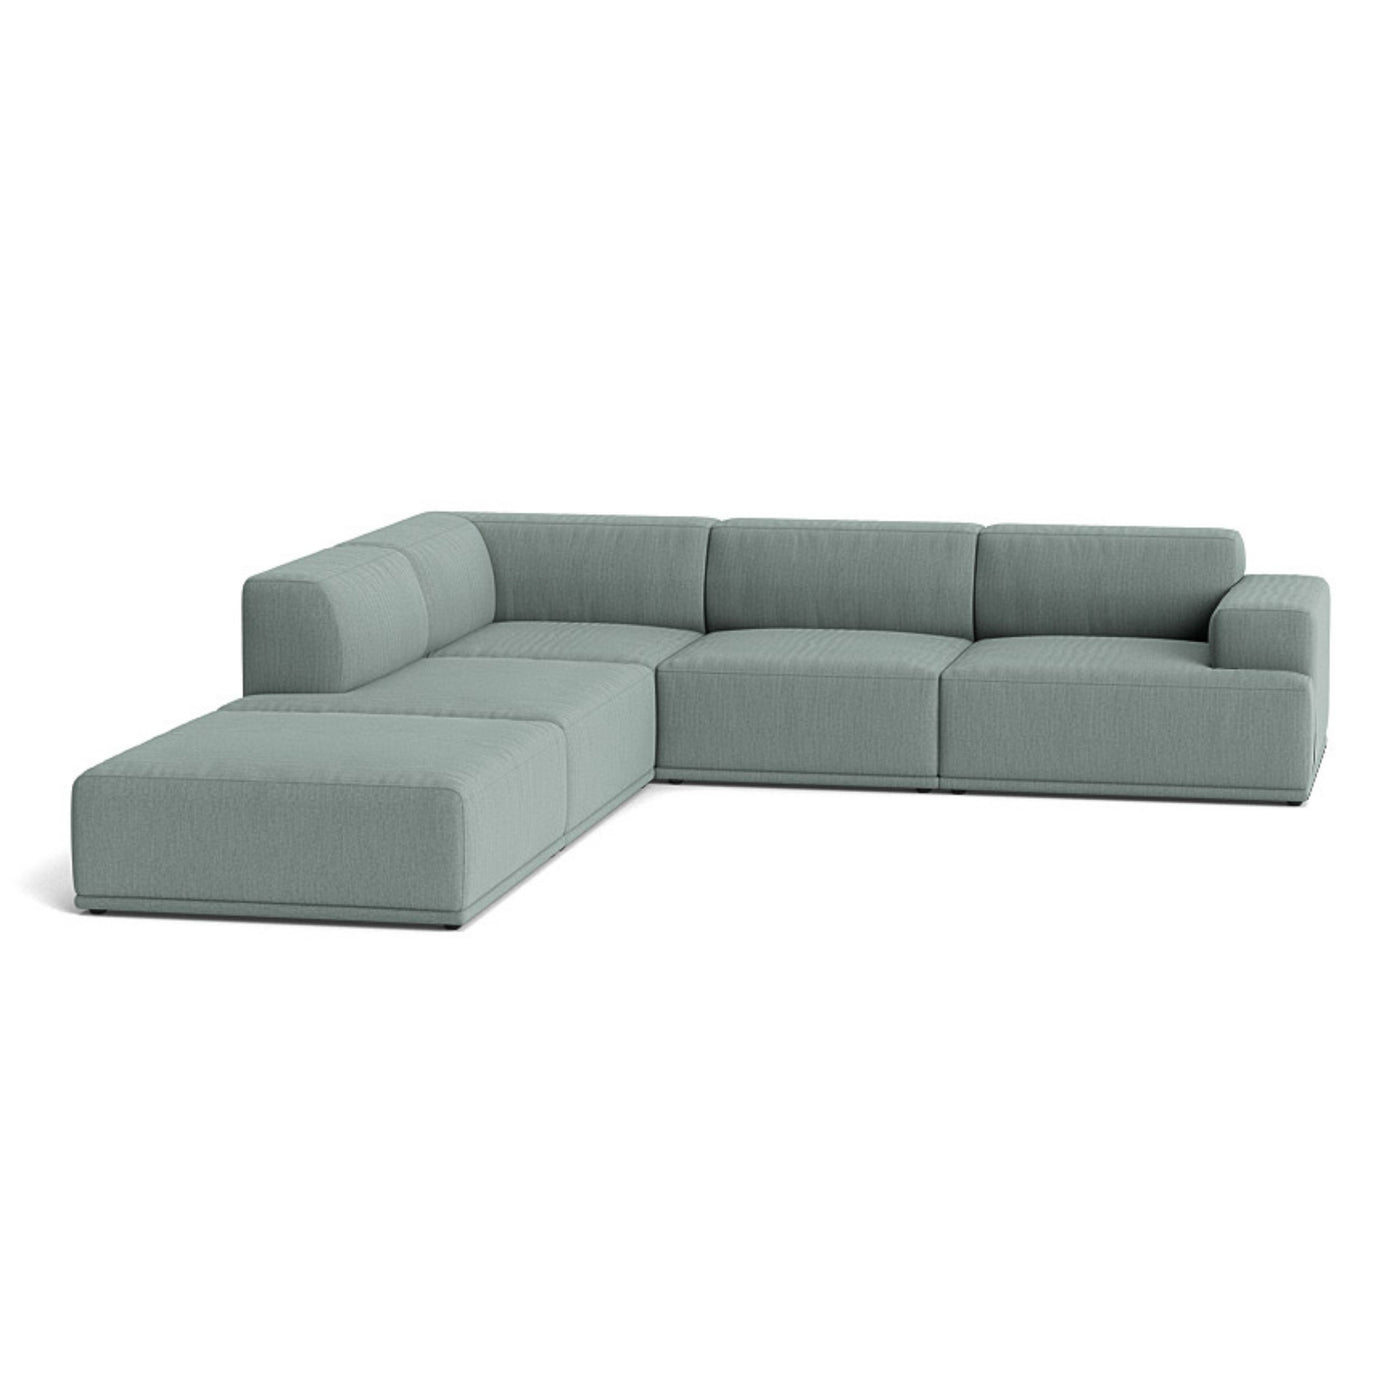 Muuto Connect Soft Modular Corner Sofa, configuration 1. Made-to-order from someday designs. #colour_re-wool-828